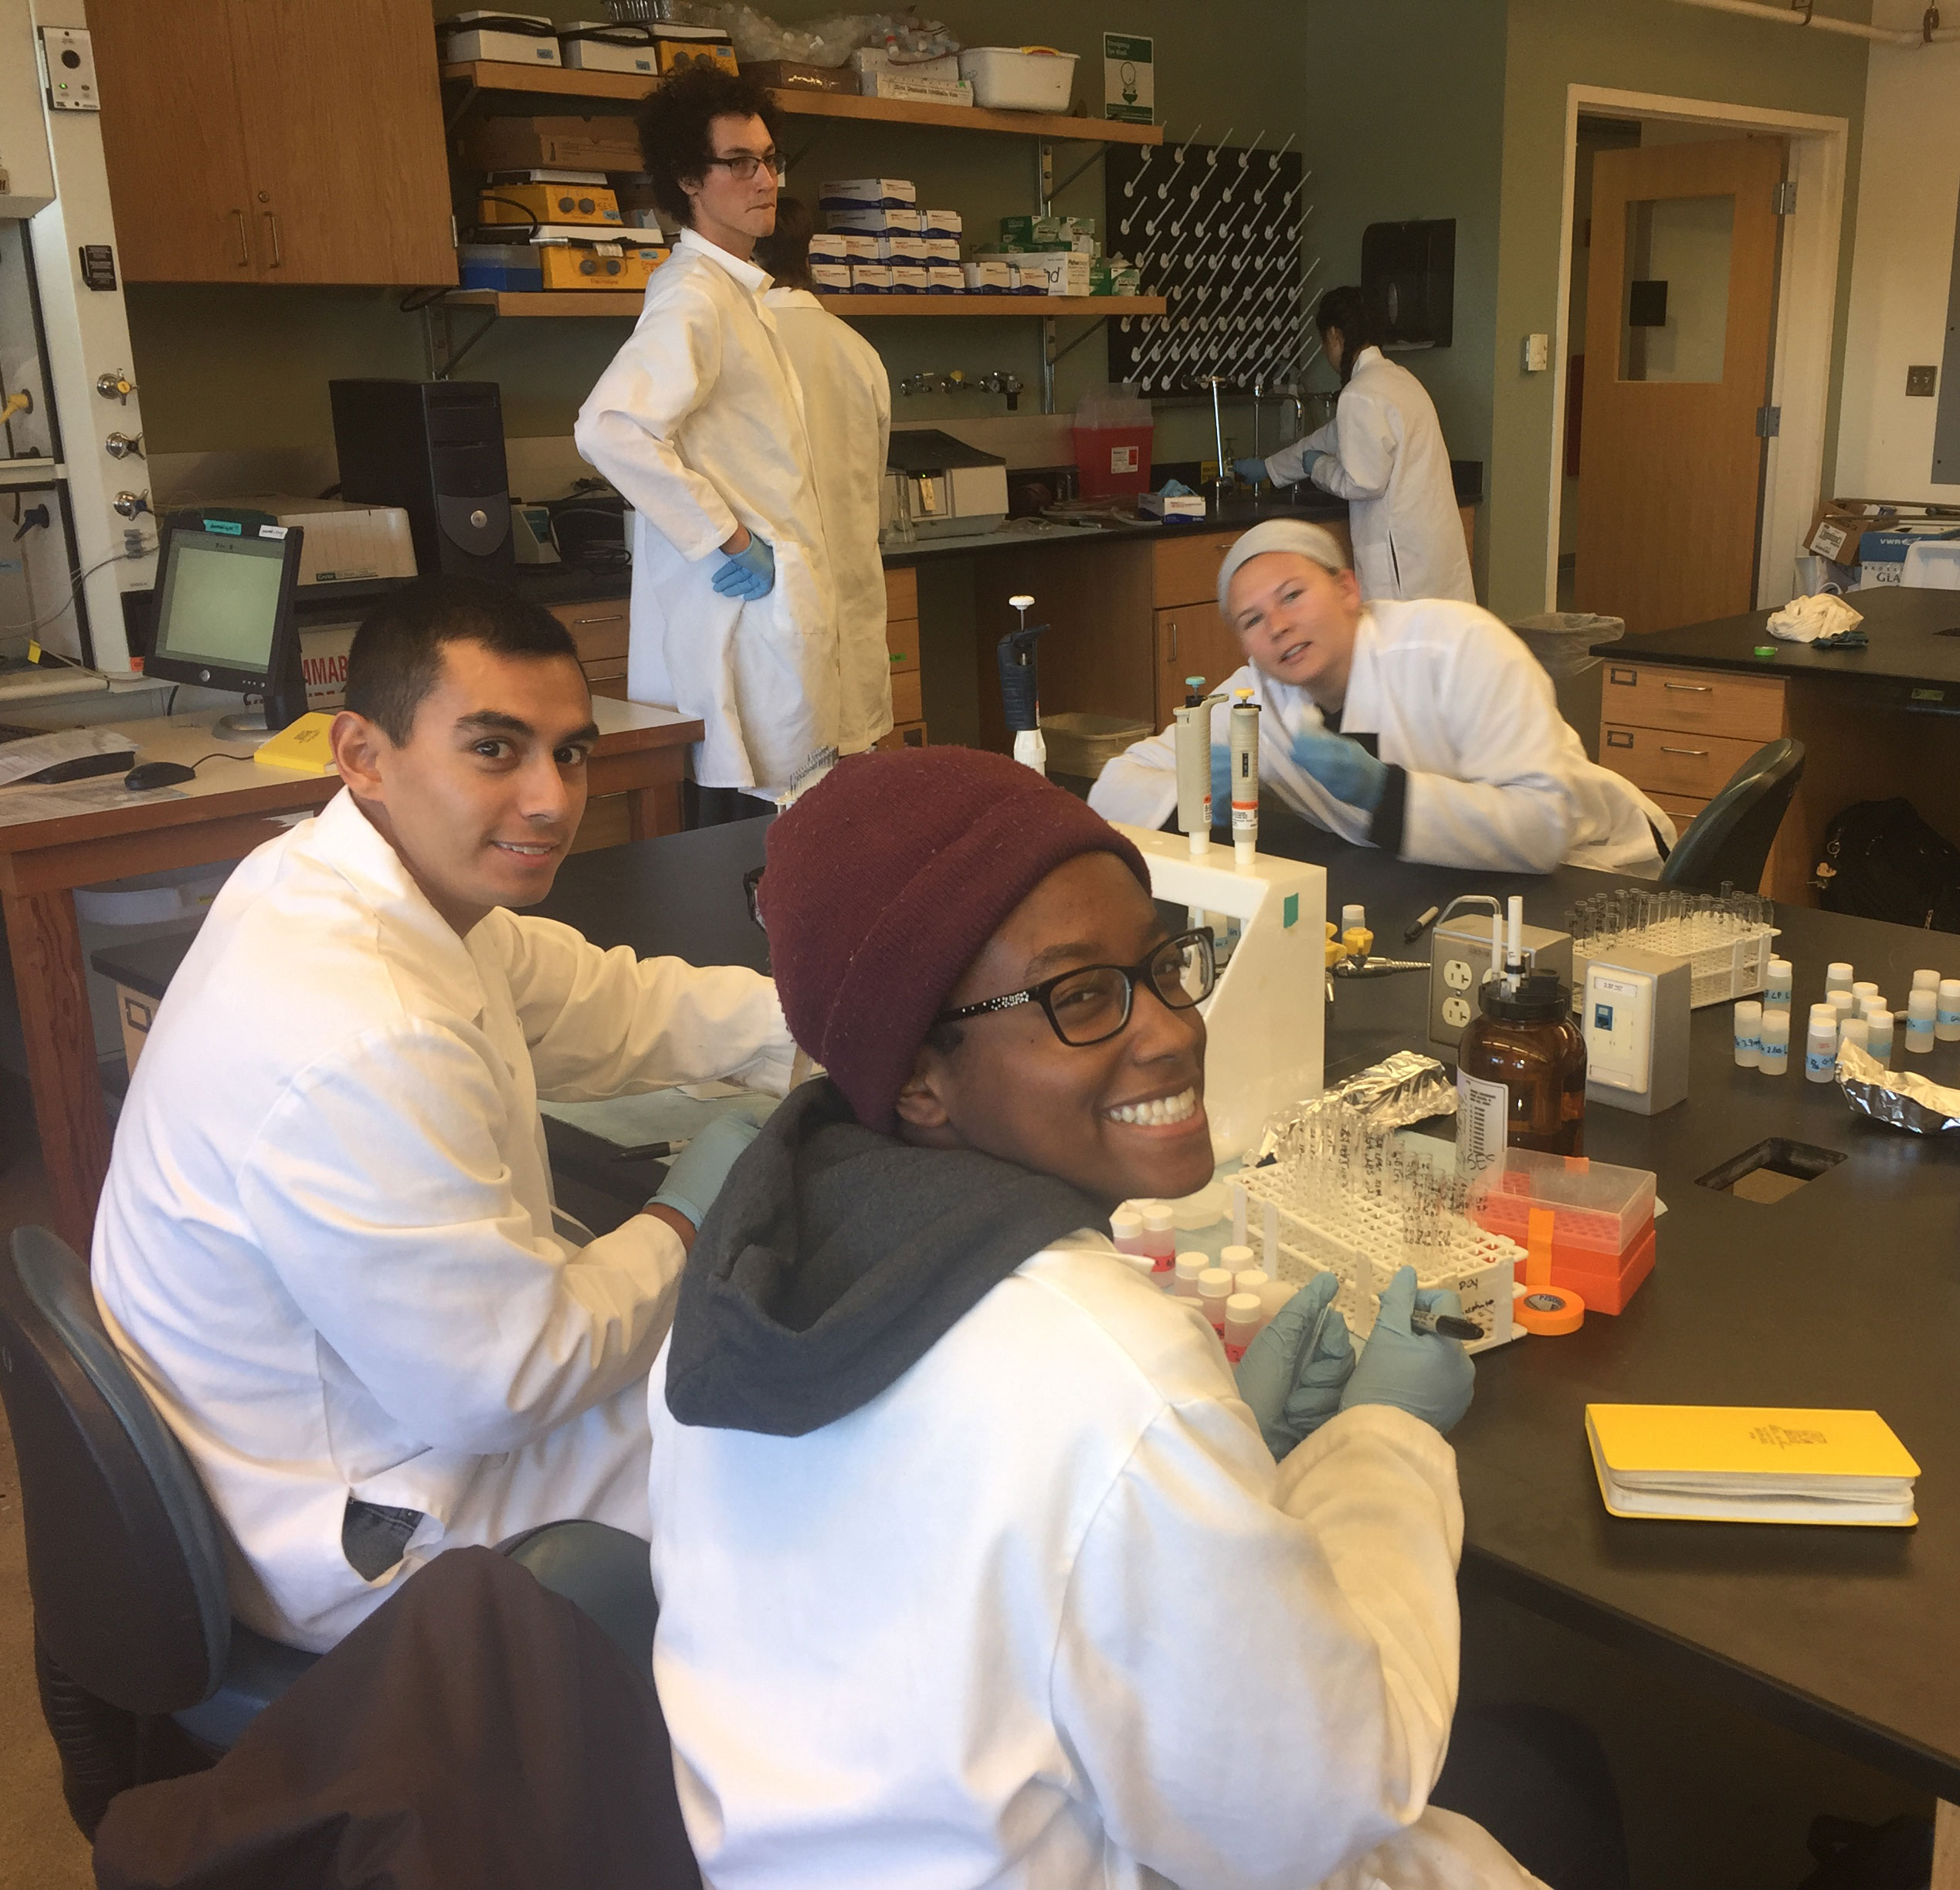 SES students in the lab at MBL in 2018. Credit: Ken Foreman